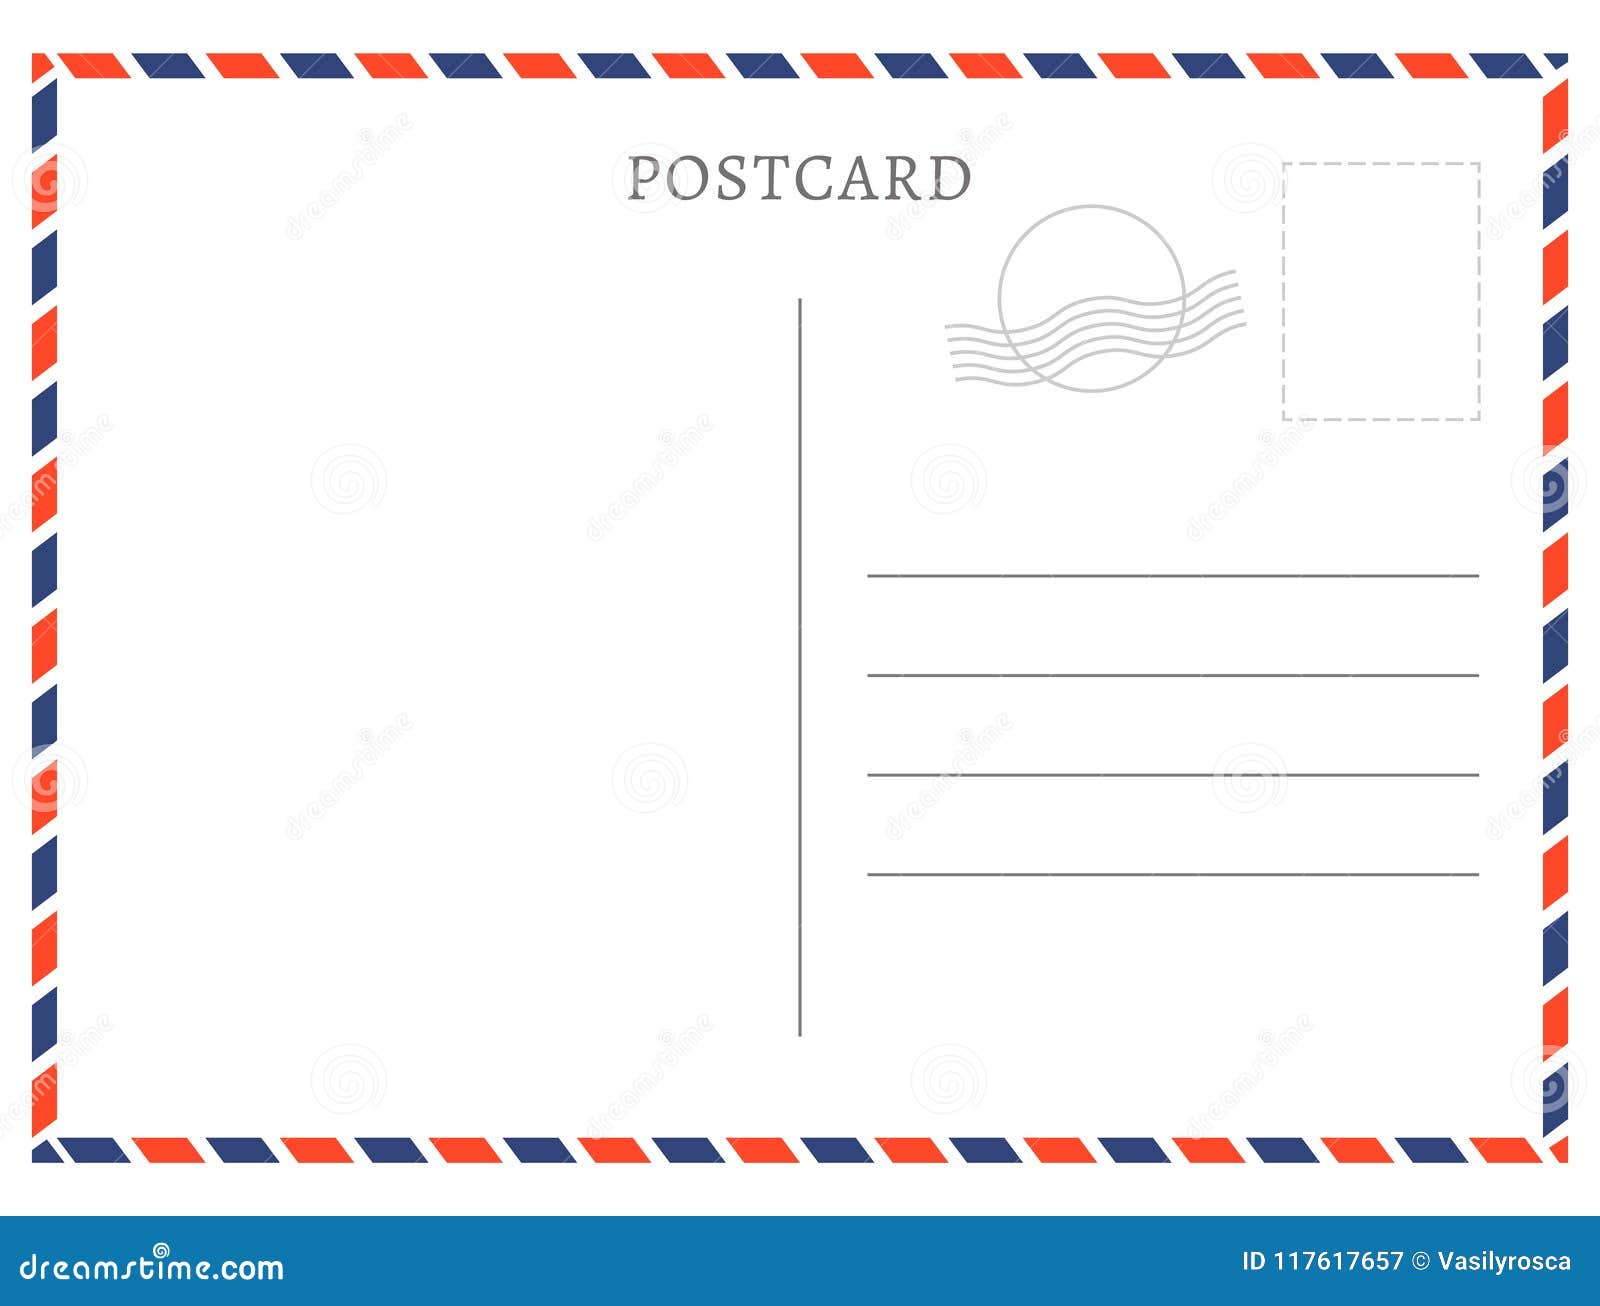 Postcard Template Paper White Texture. Vector Postcard Empty Mail With Free Downloadable Postcard Templates